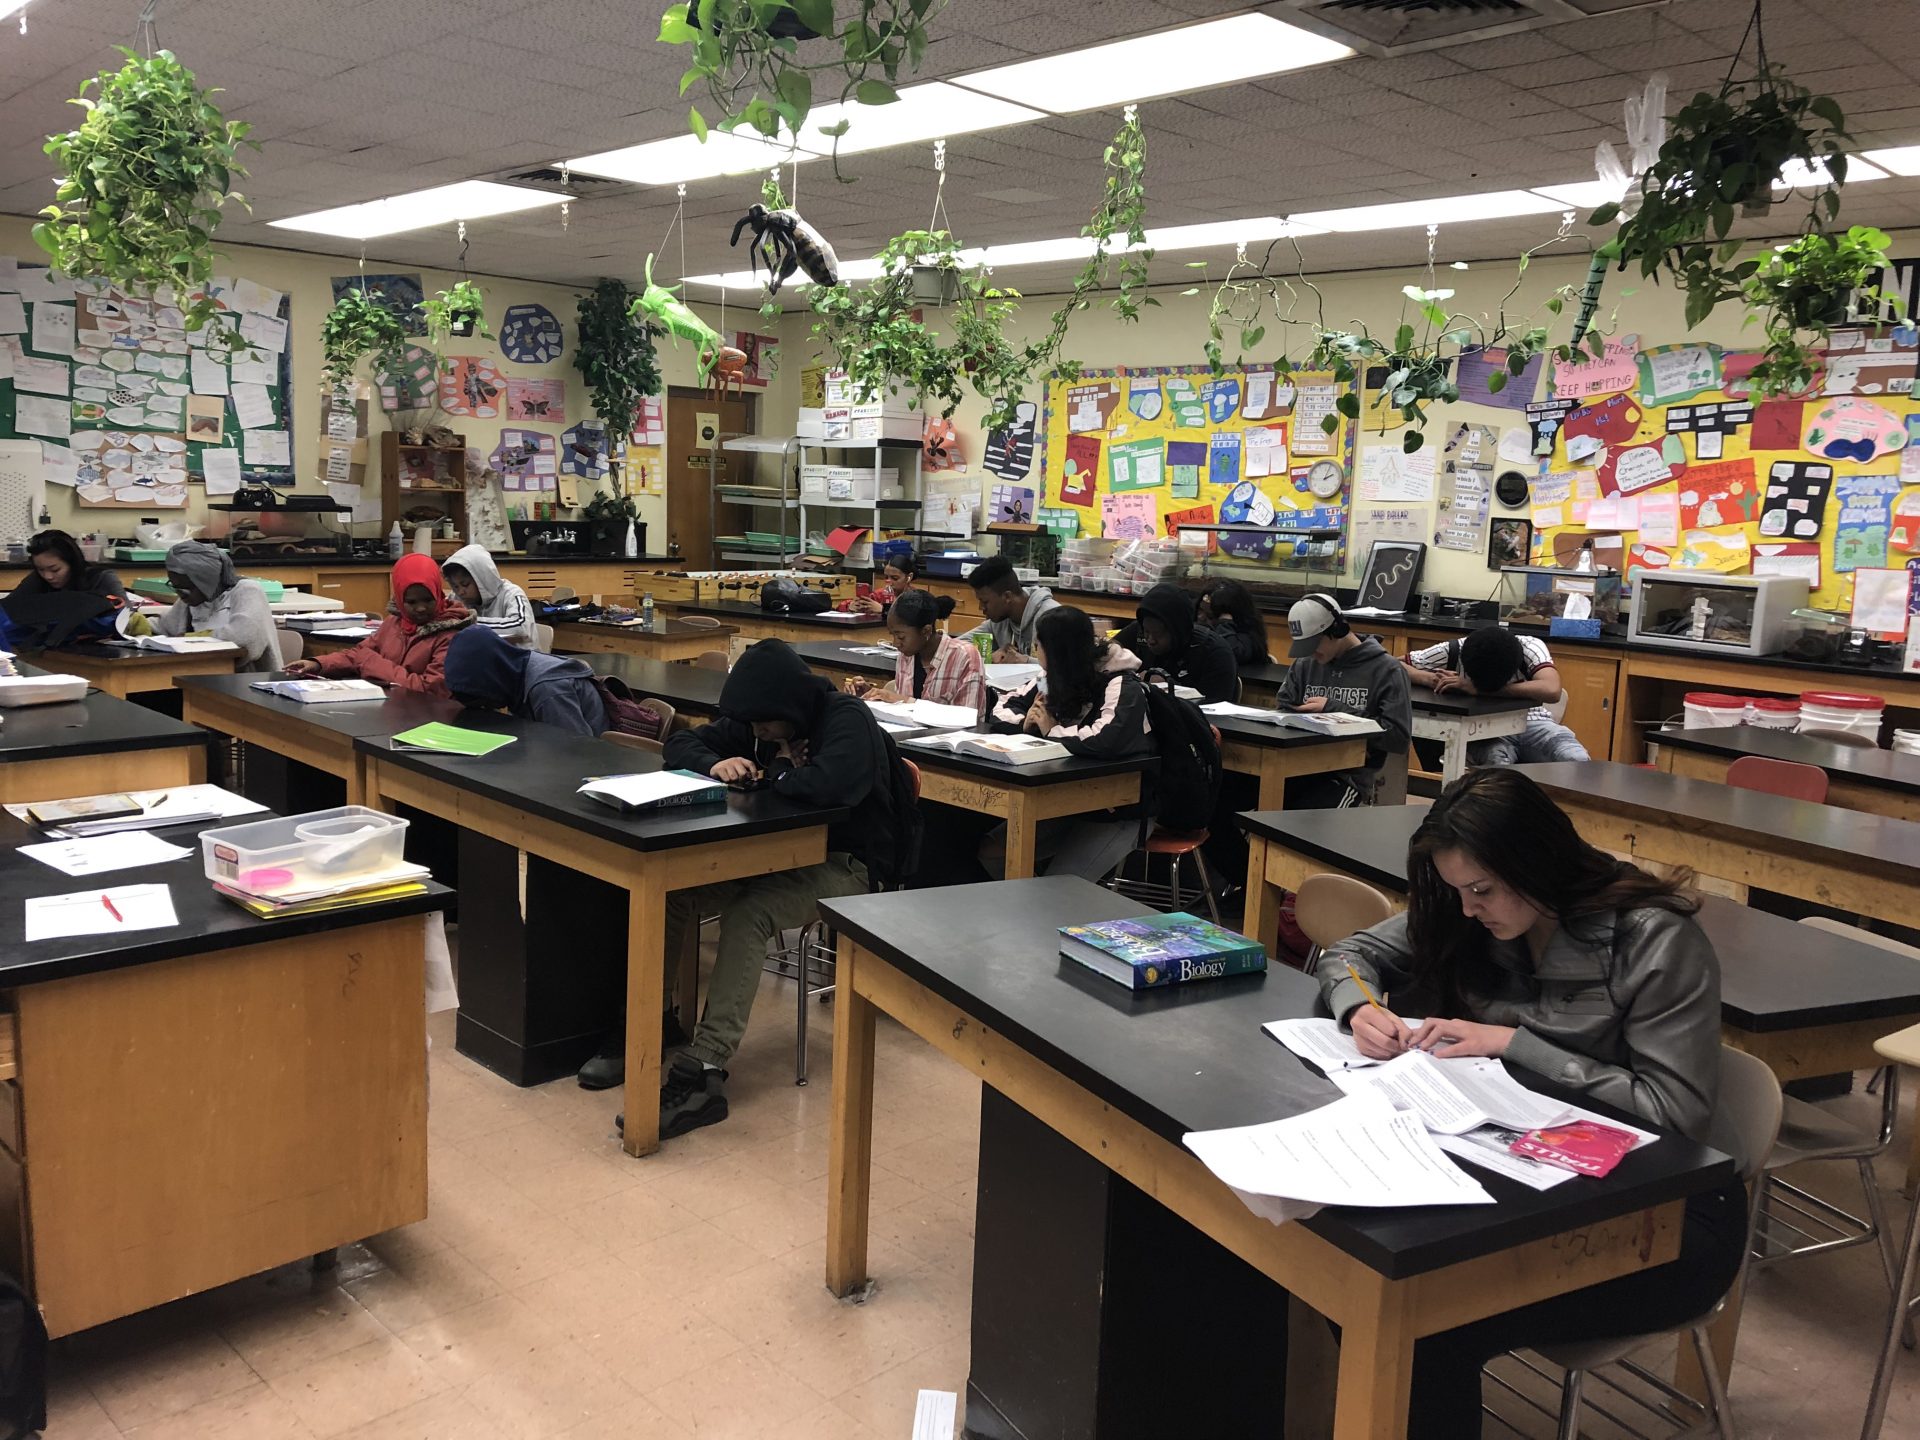 Syracuse high school students sitting at desks in the classroom with their heads down working in their biology books.